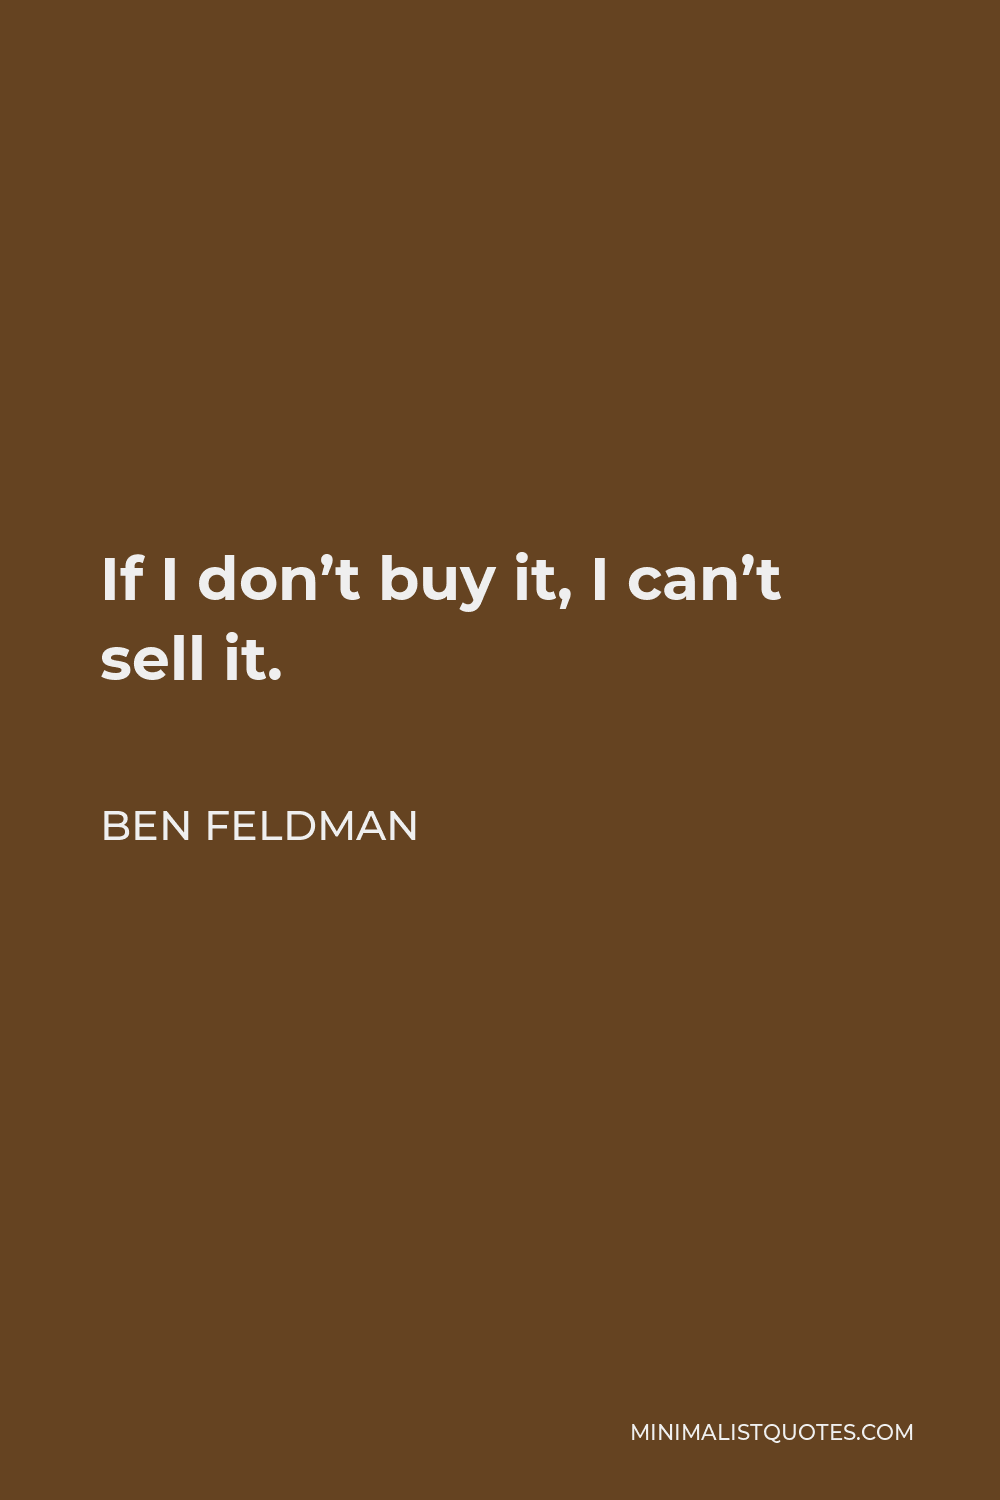 Ben Feldman Quote - If I don’t buy it, I can’t sell it.